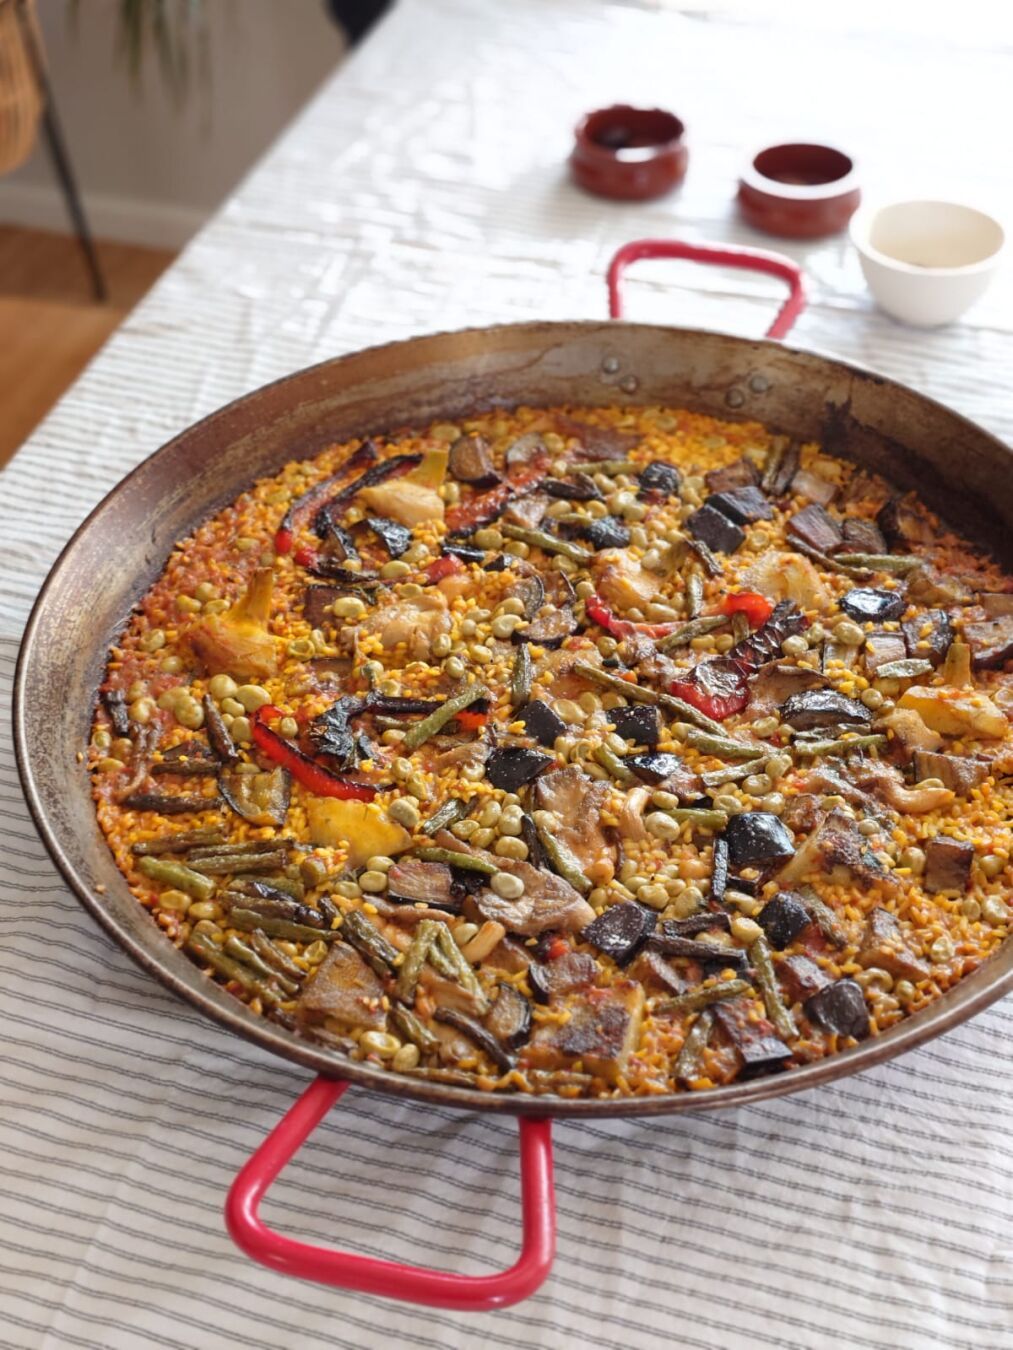 The photo shows a vegan paella on a table